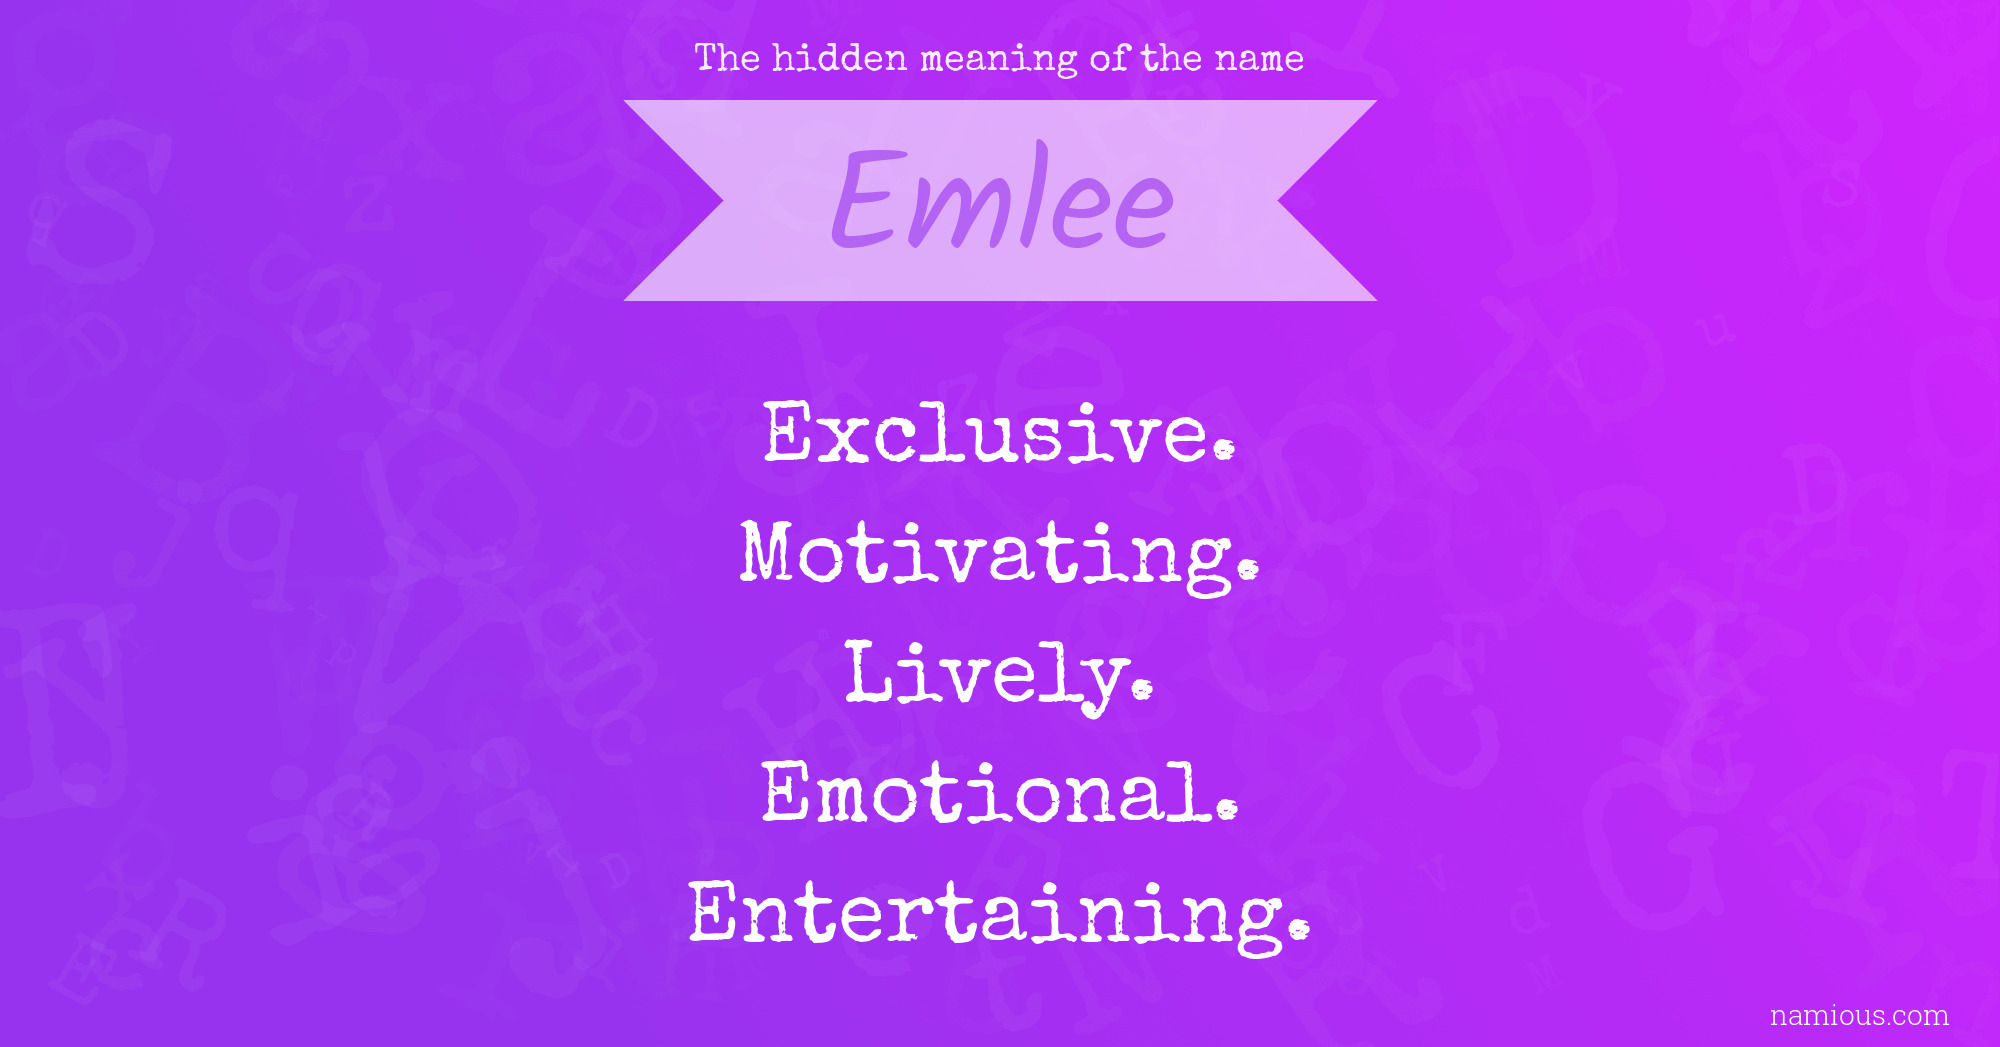 The hidden meaning of the name Emlee